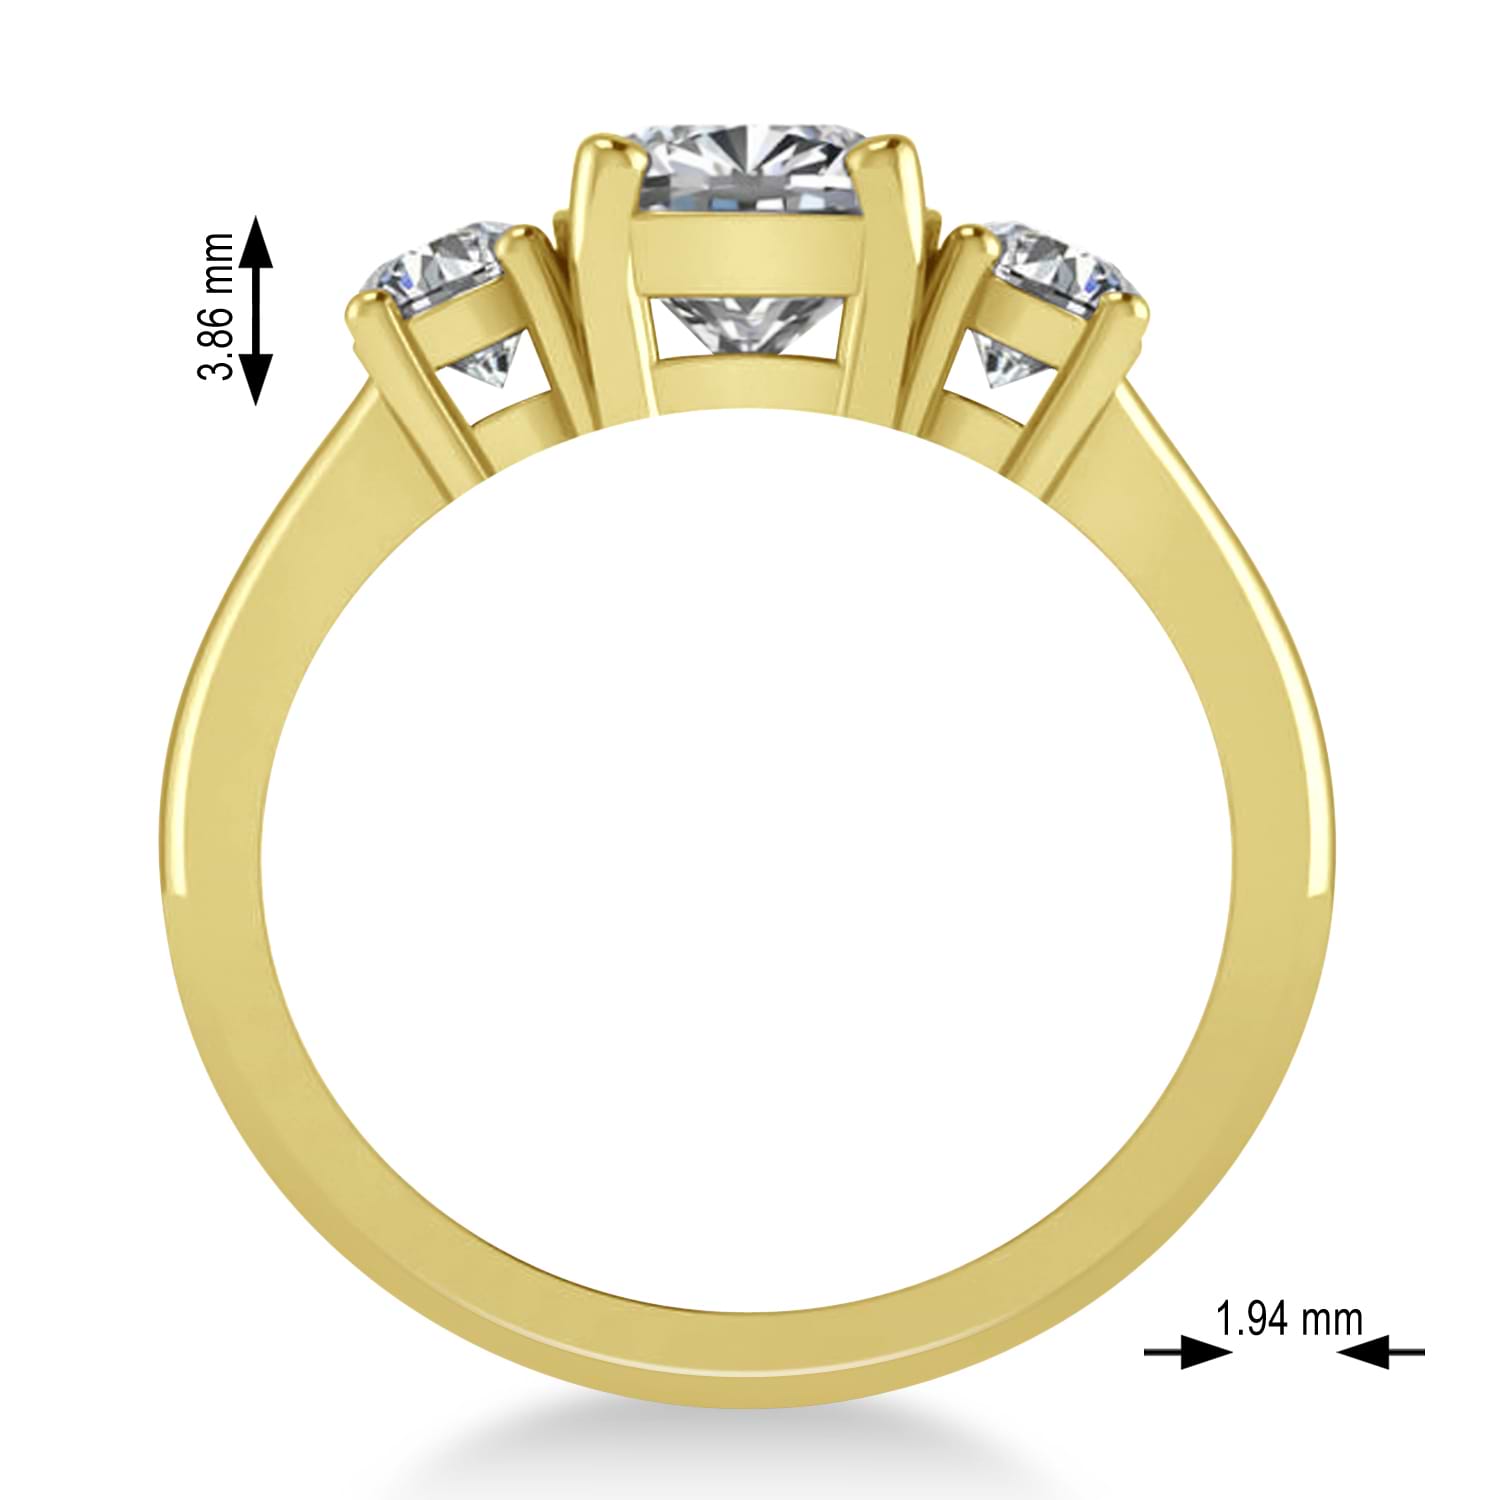 Diamond Ring Series Part 3 | sophisticated jewellery